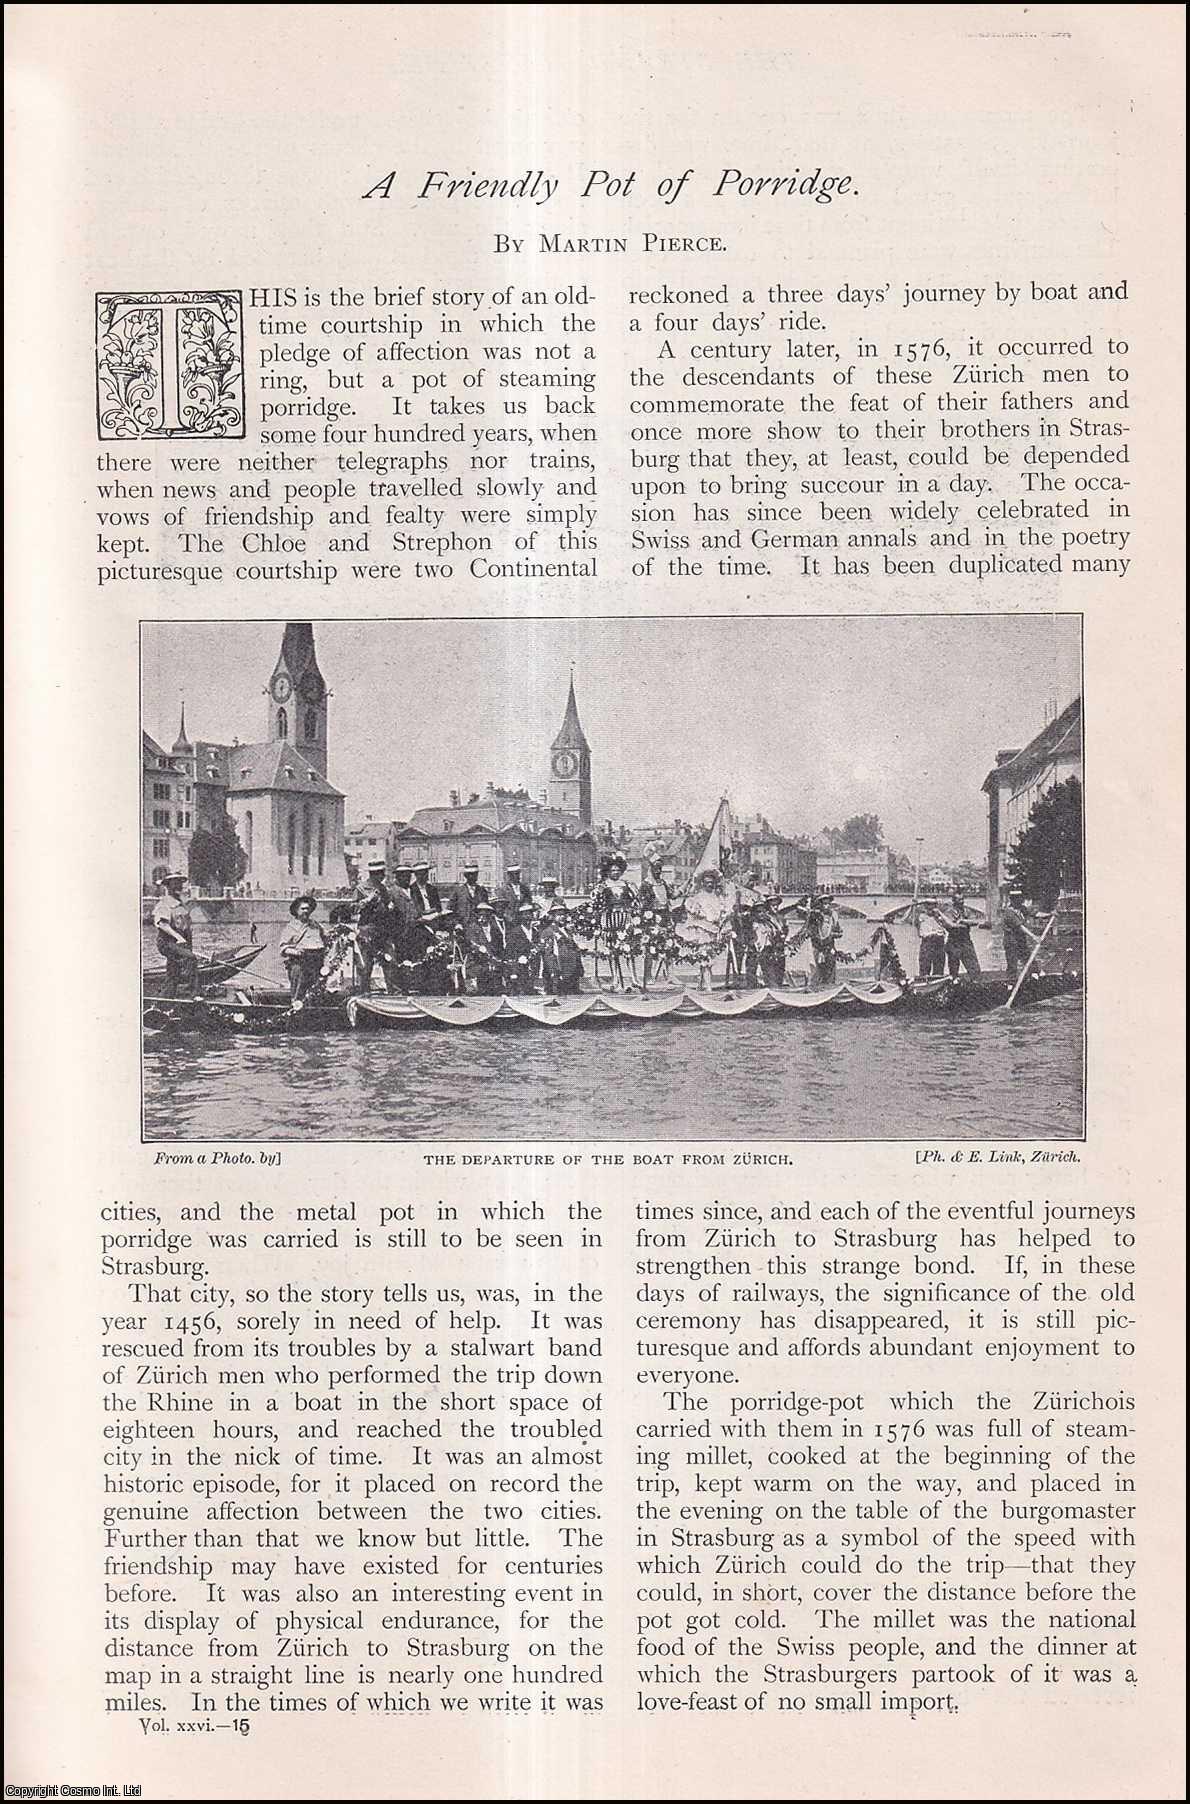 Pierce - From Zurich to Strasburg by boat : a Friendly Pot of Porridge. An uncommon original article from The Strand Magazine, 1903.